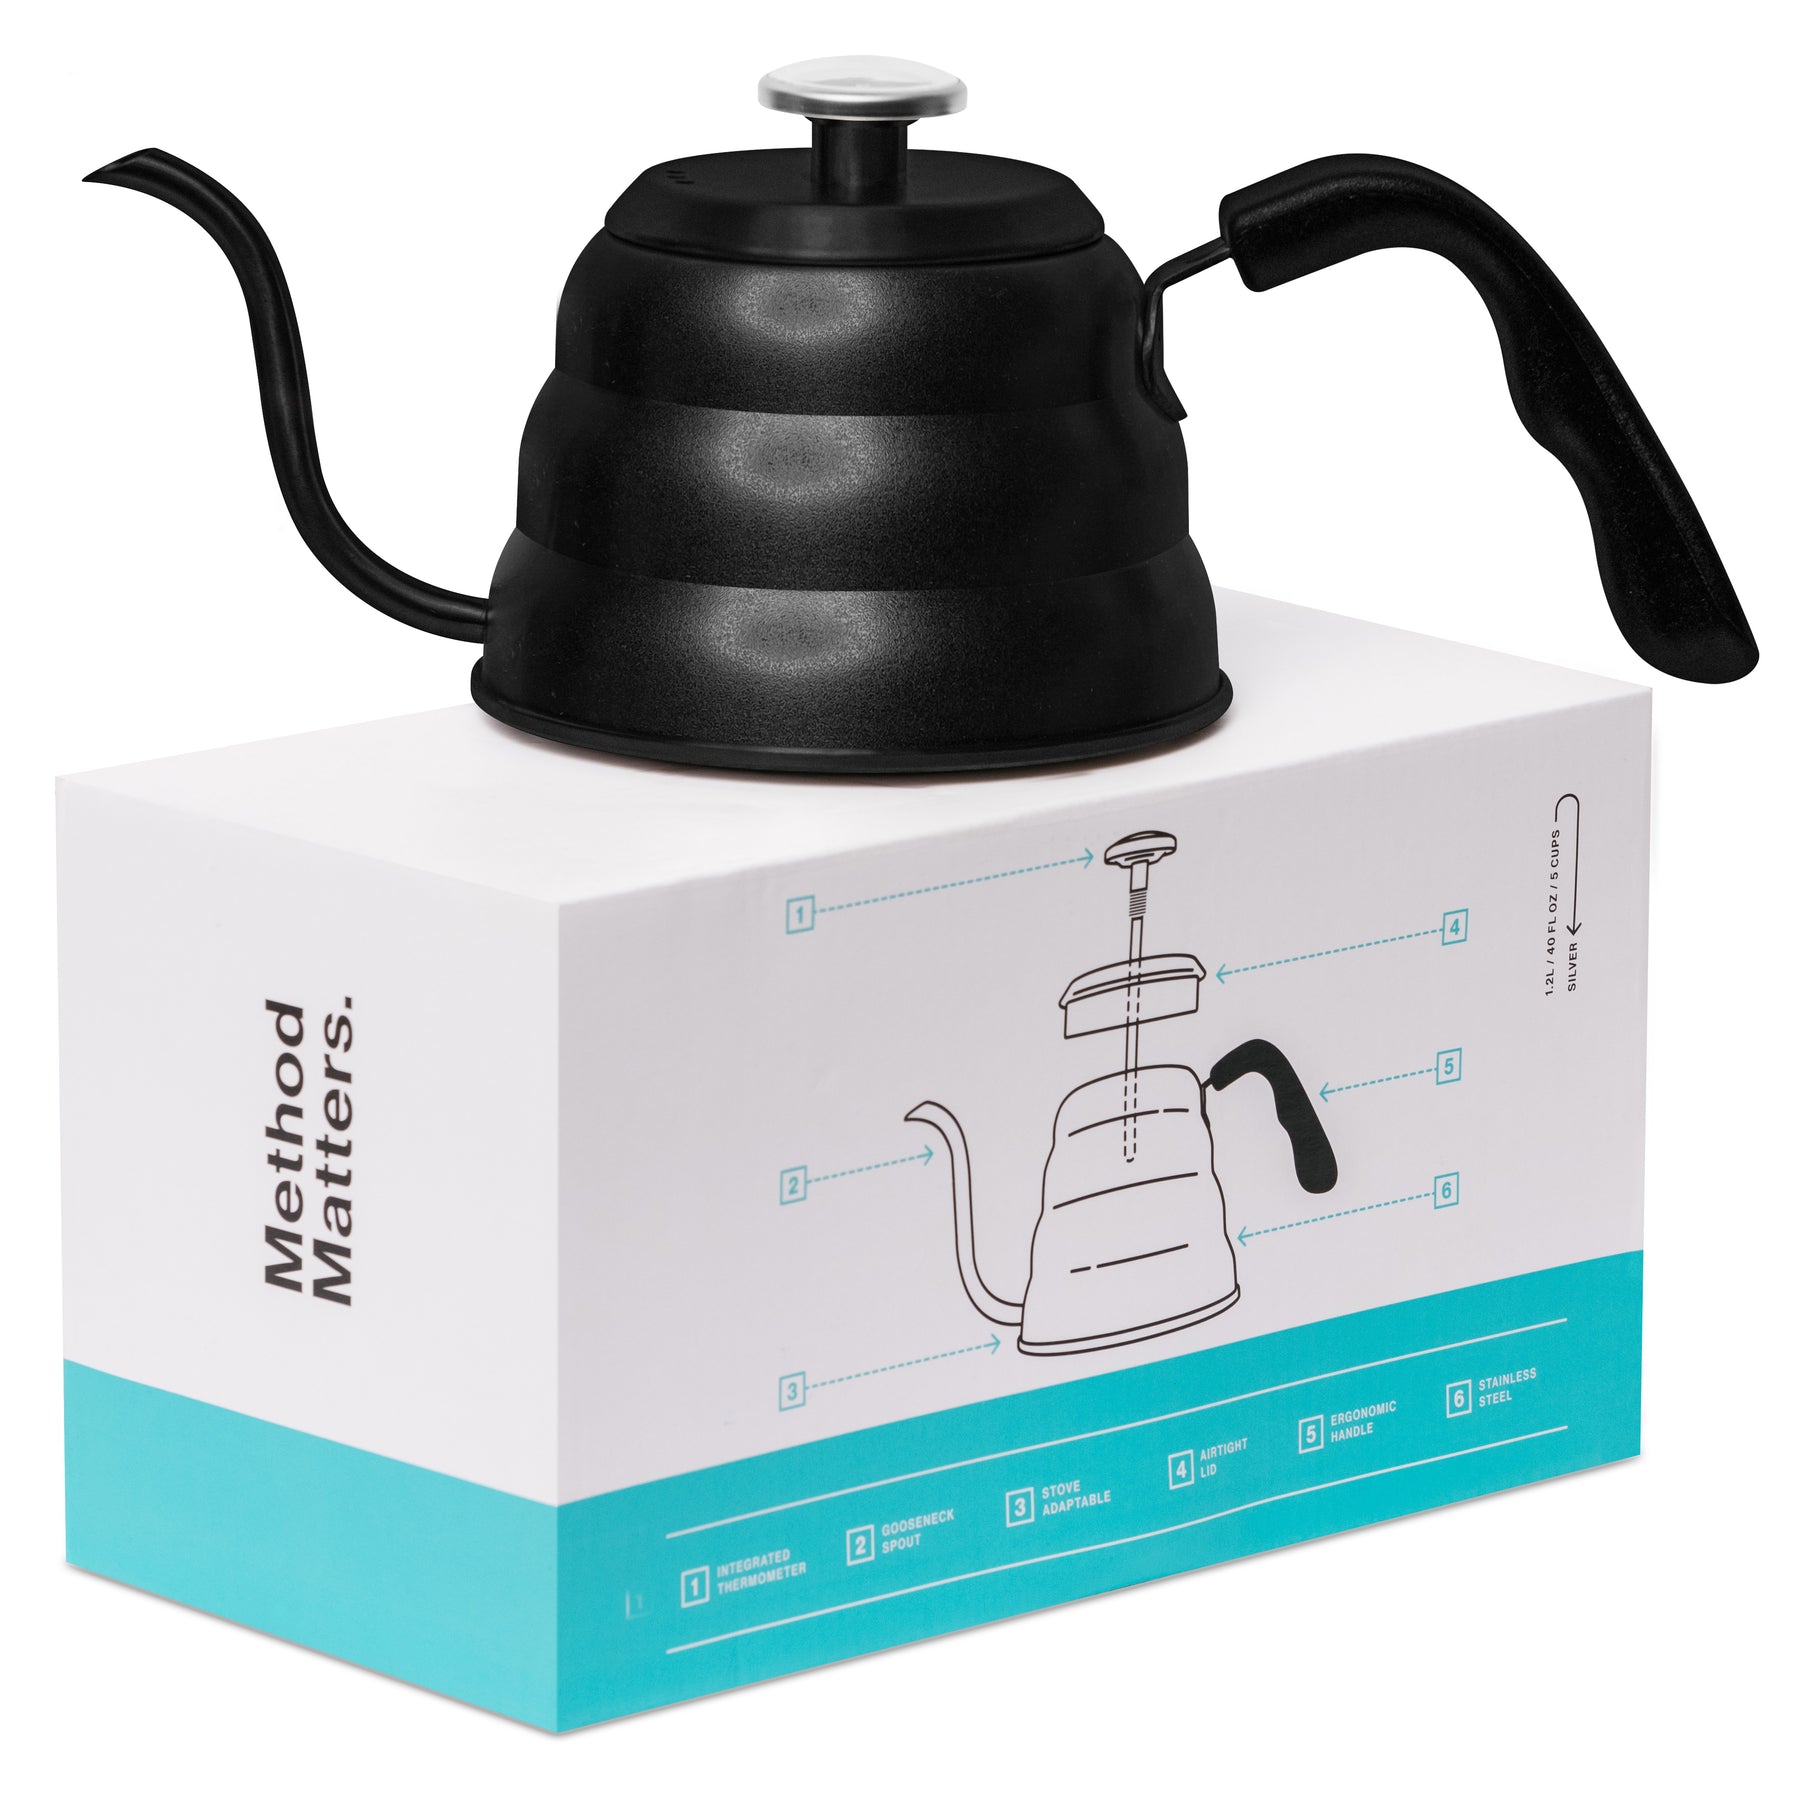 Chefbar Tea Kettle with Thermometer for Stove Top Gooseneck Kettle, Pour Over Coffee Kettle, Goose Neck Tea Pot Stovetop, Hot Water Heater for